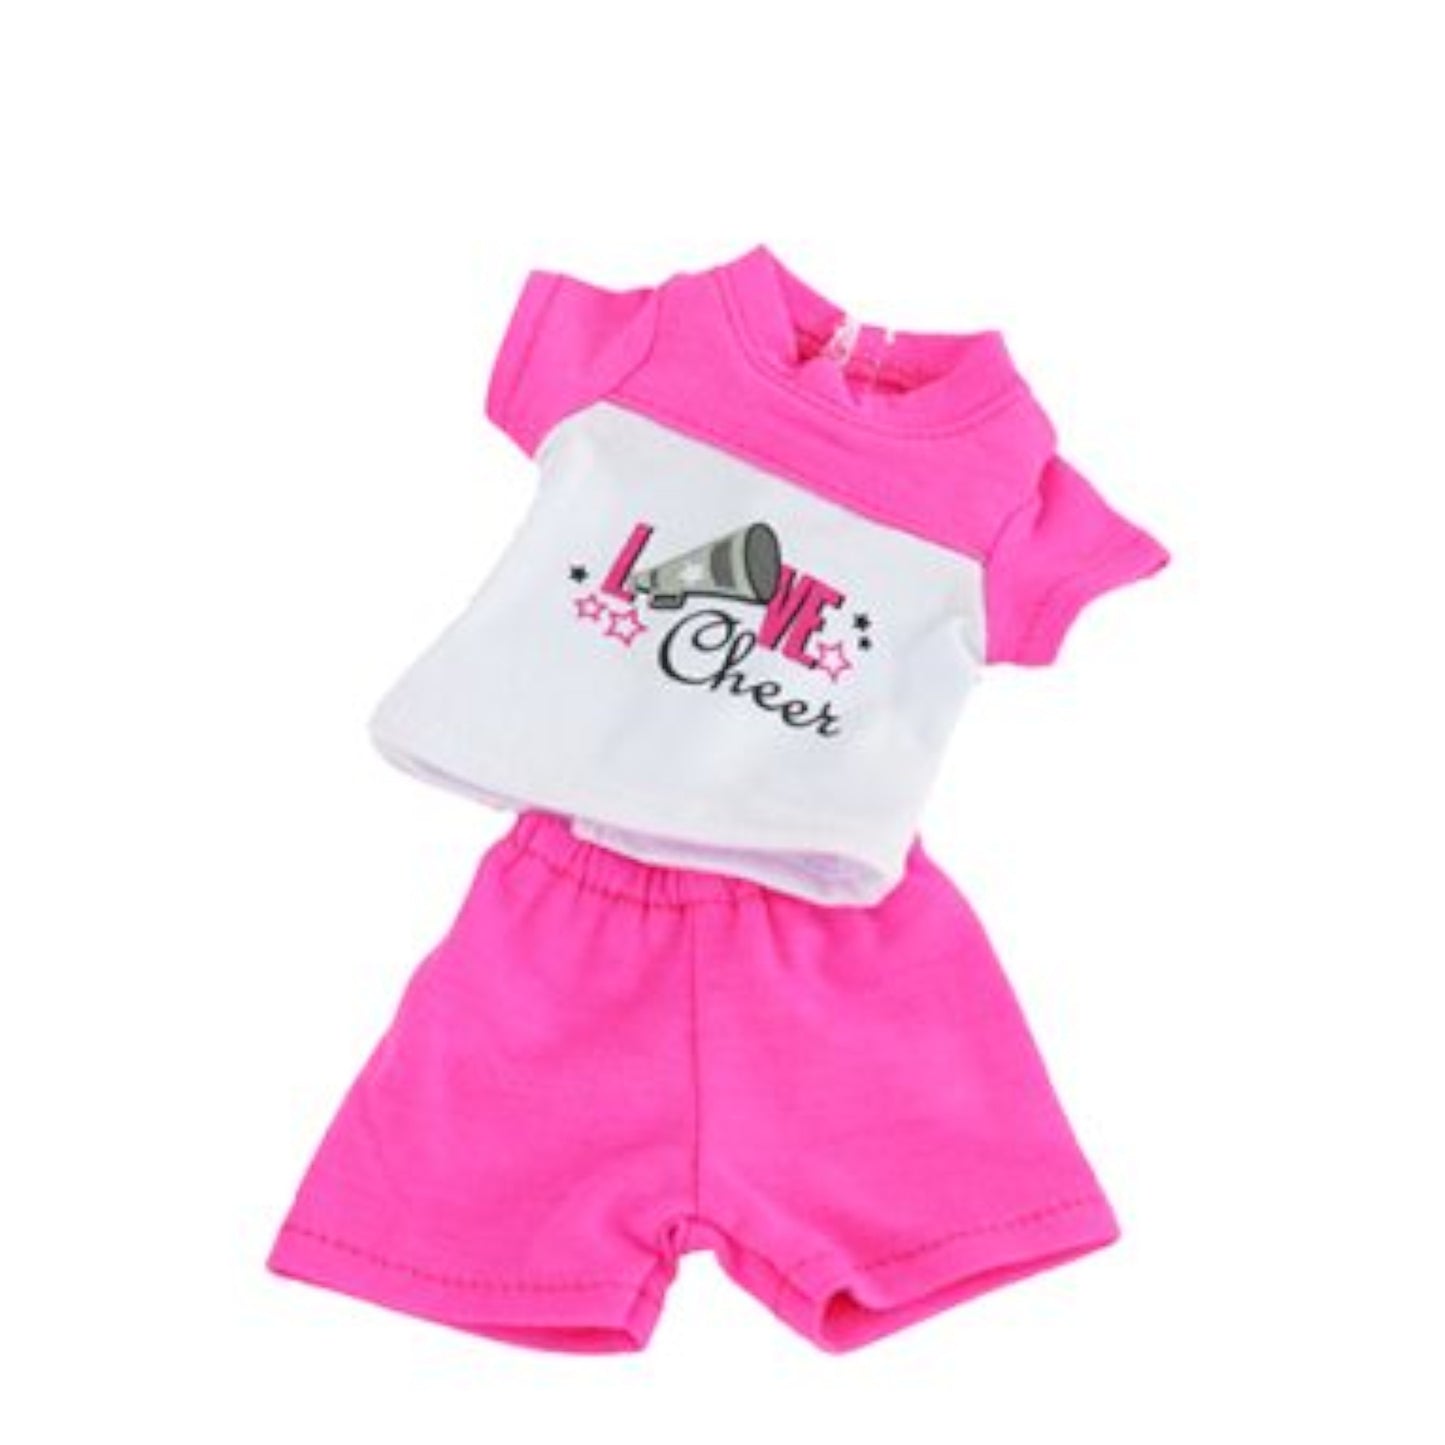 Love Cheer Shorts Set for 14 1/2-inch dolls